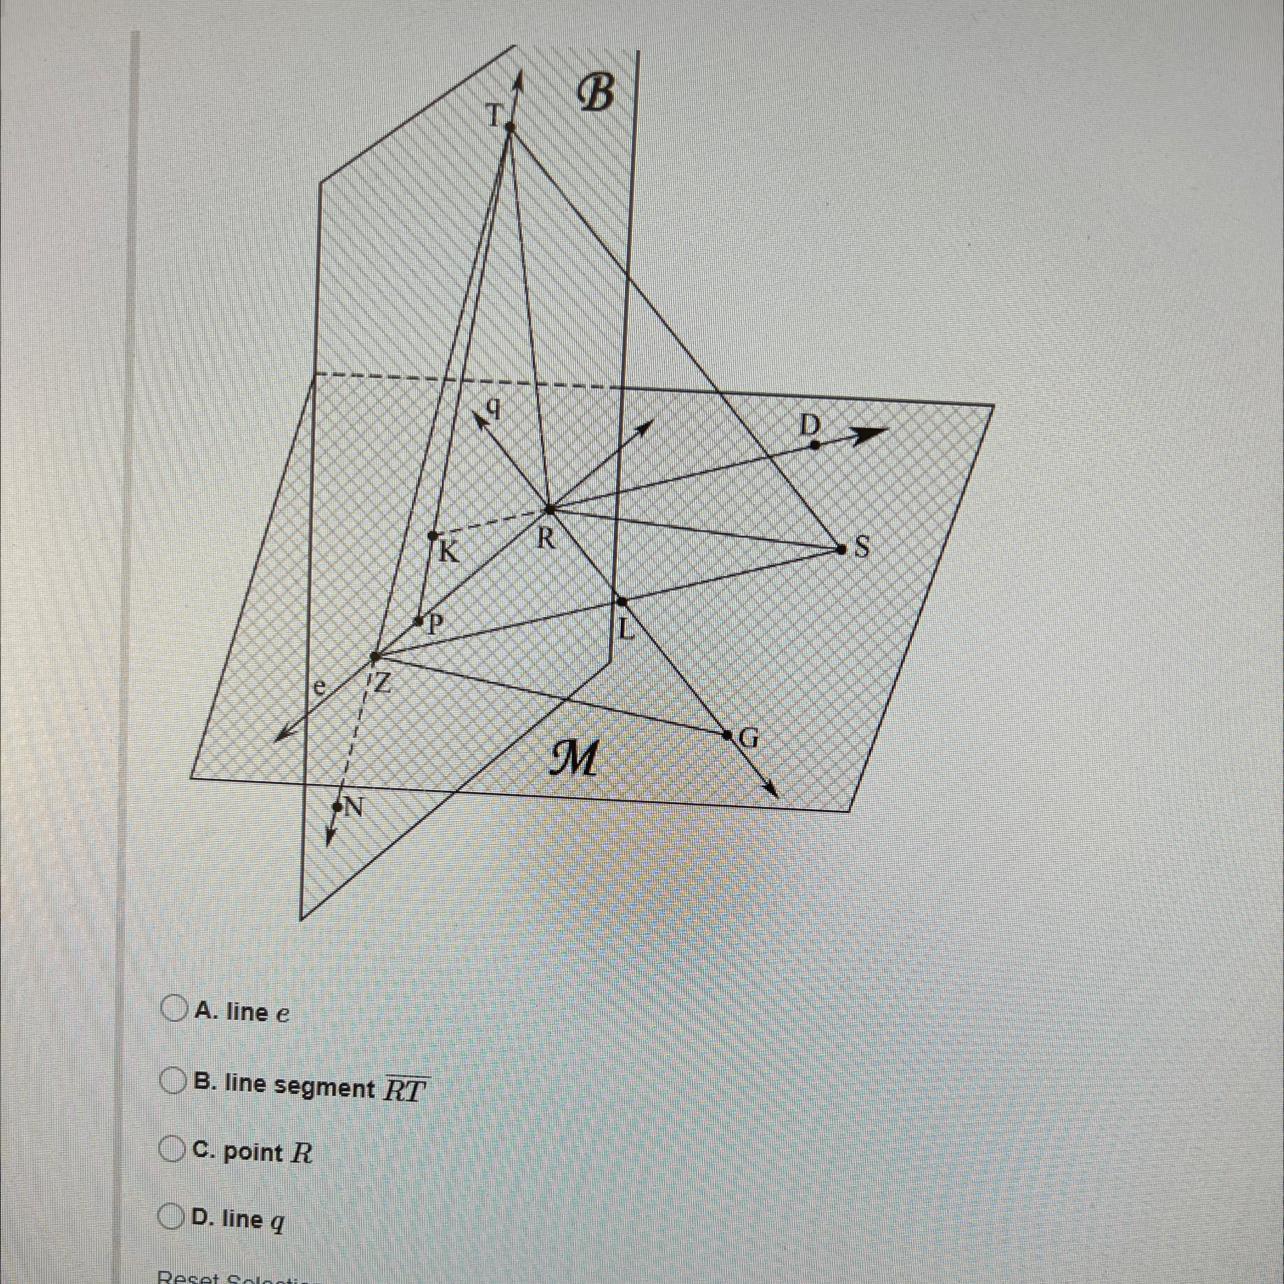 Which Of The Following Things Is Not Contained At The Plane B?